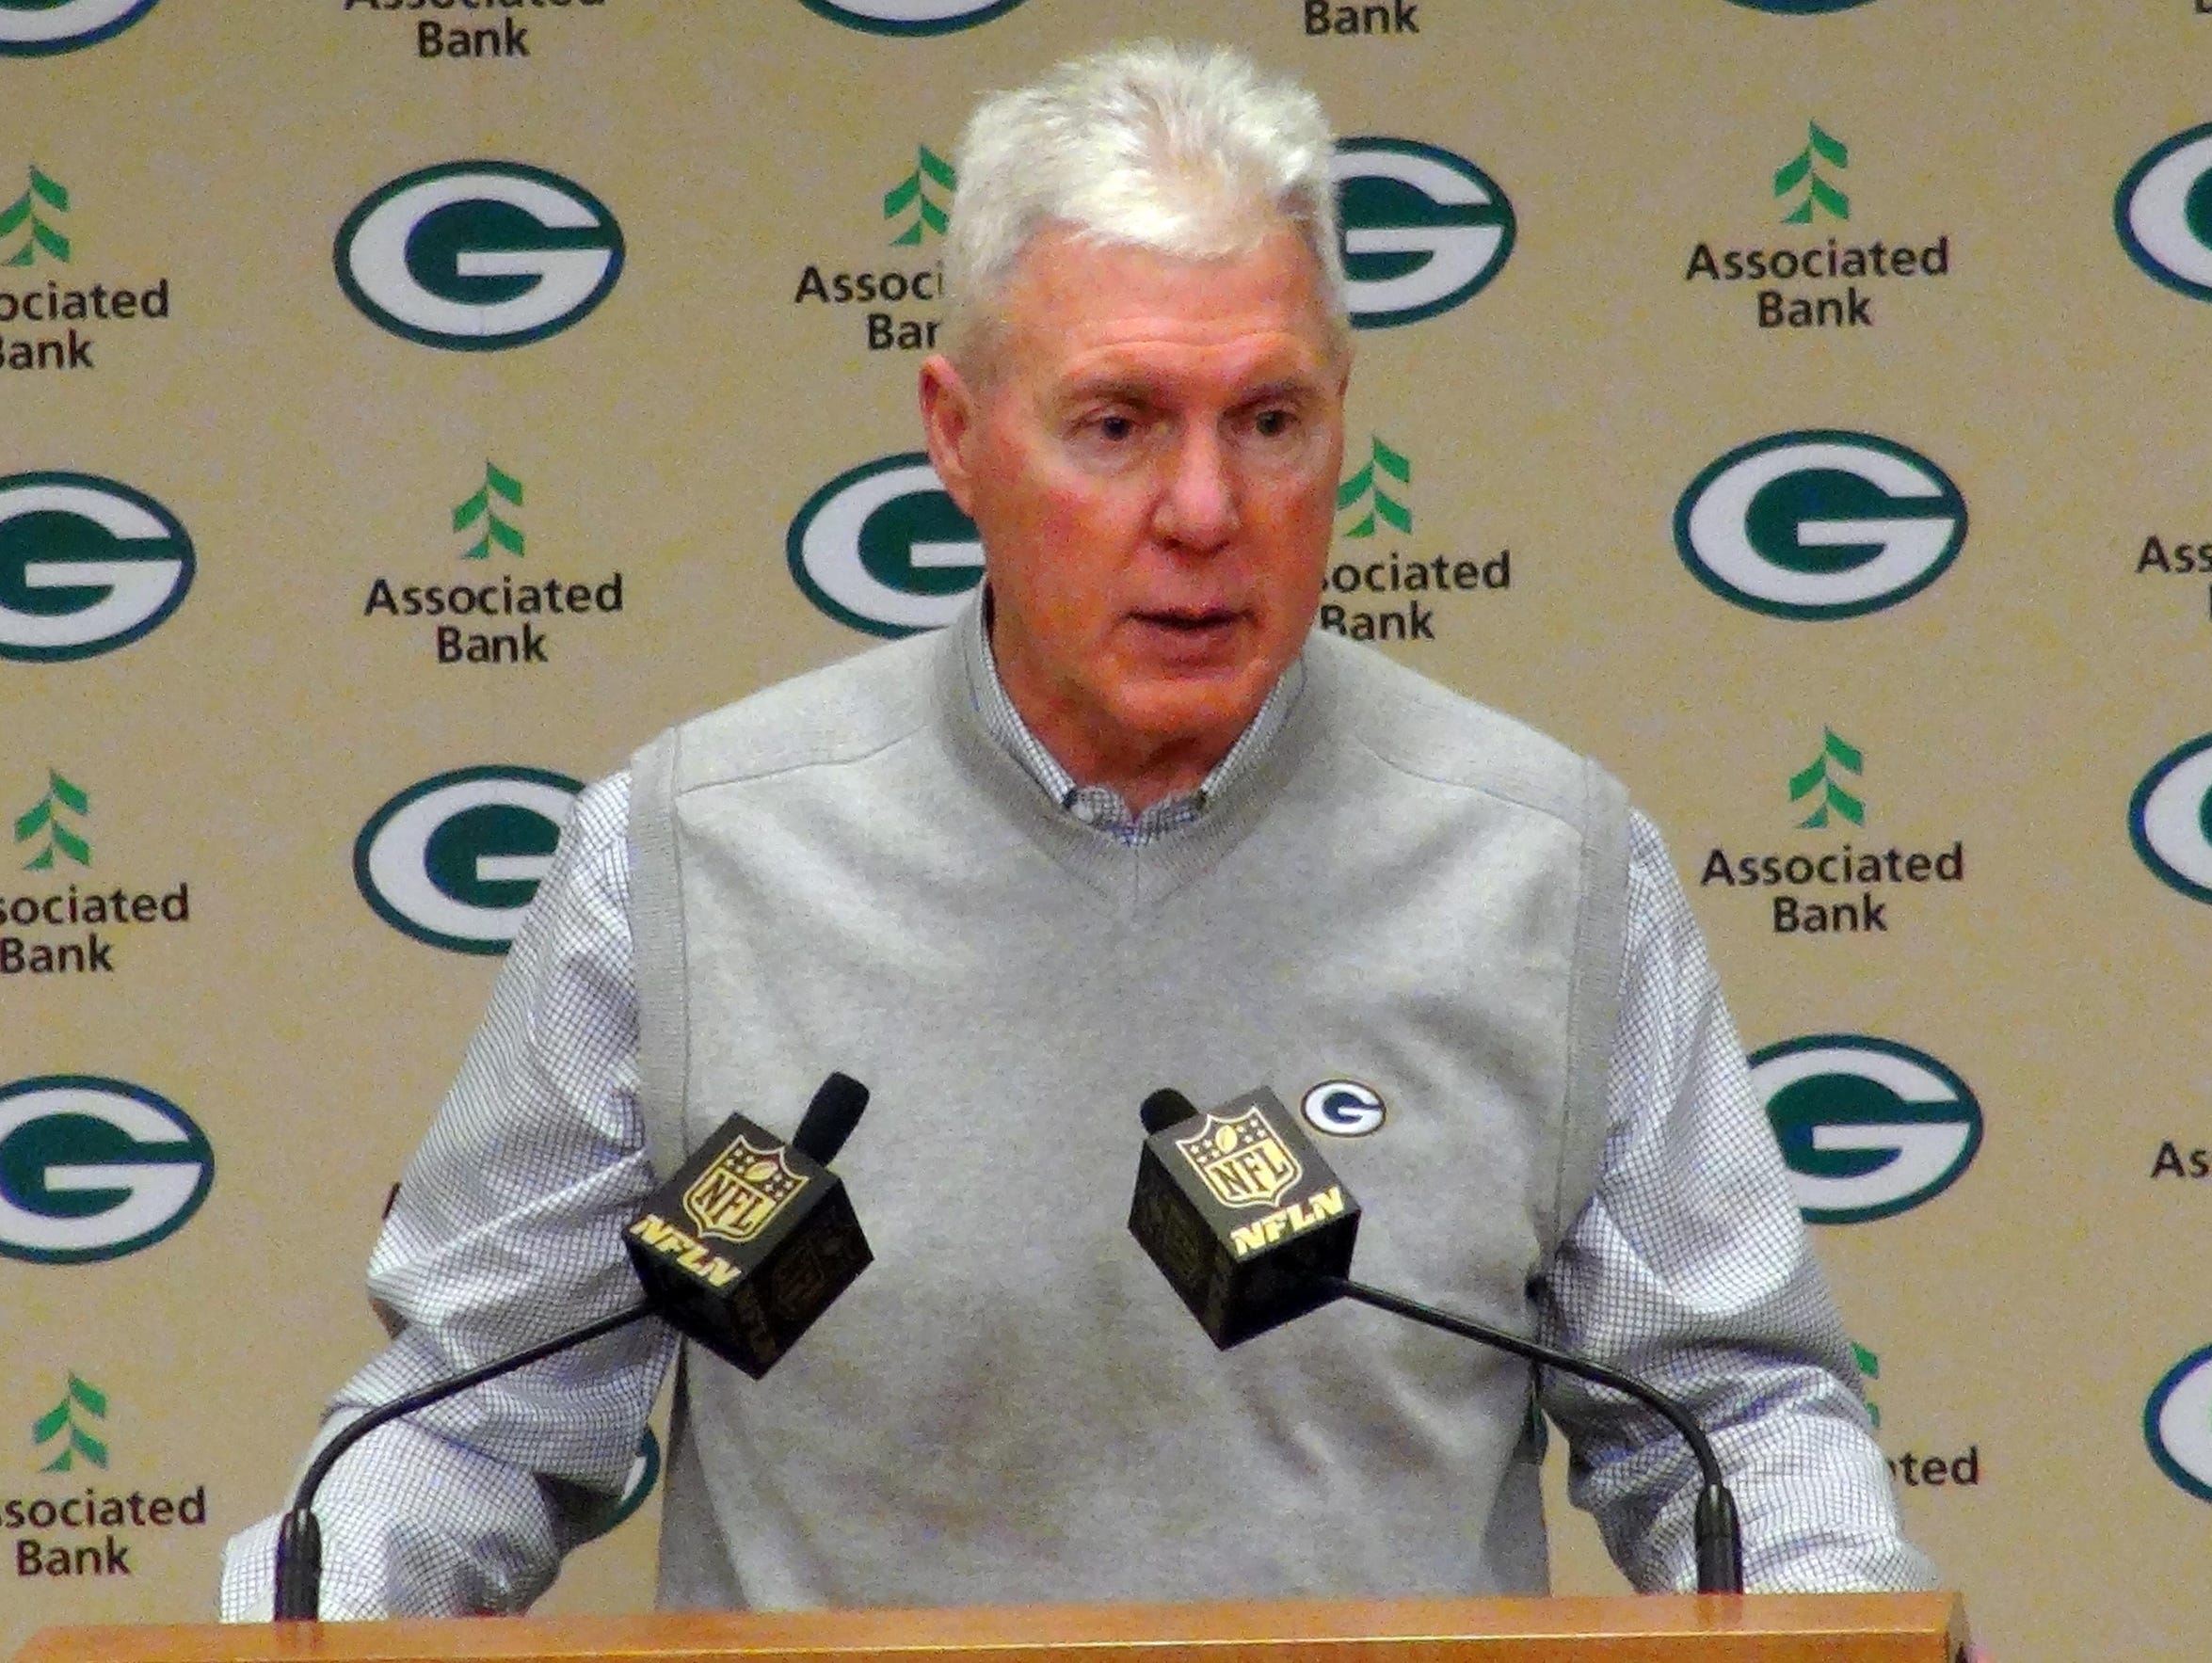 Green Bay Packers GM Ted Thompson talks about the Packers’